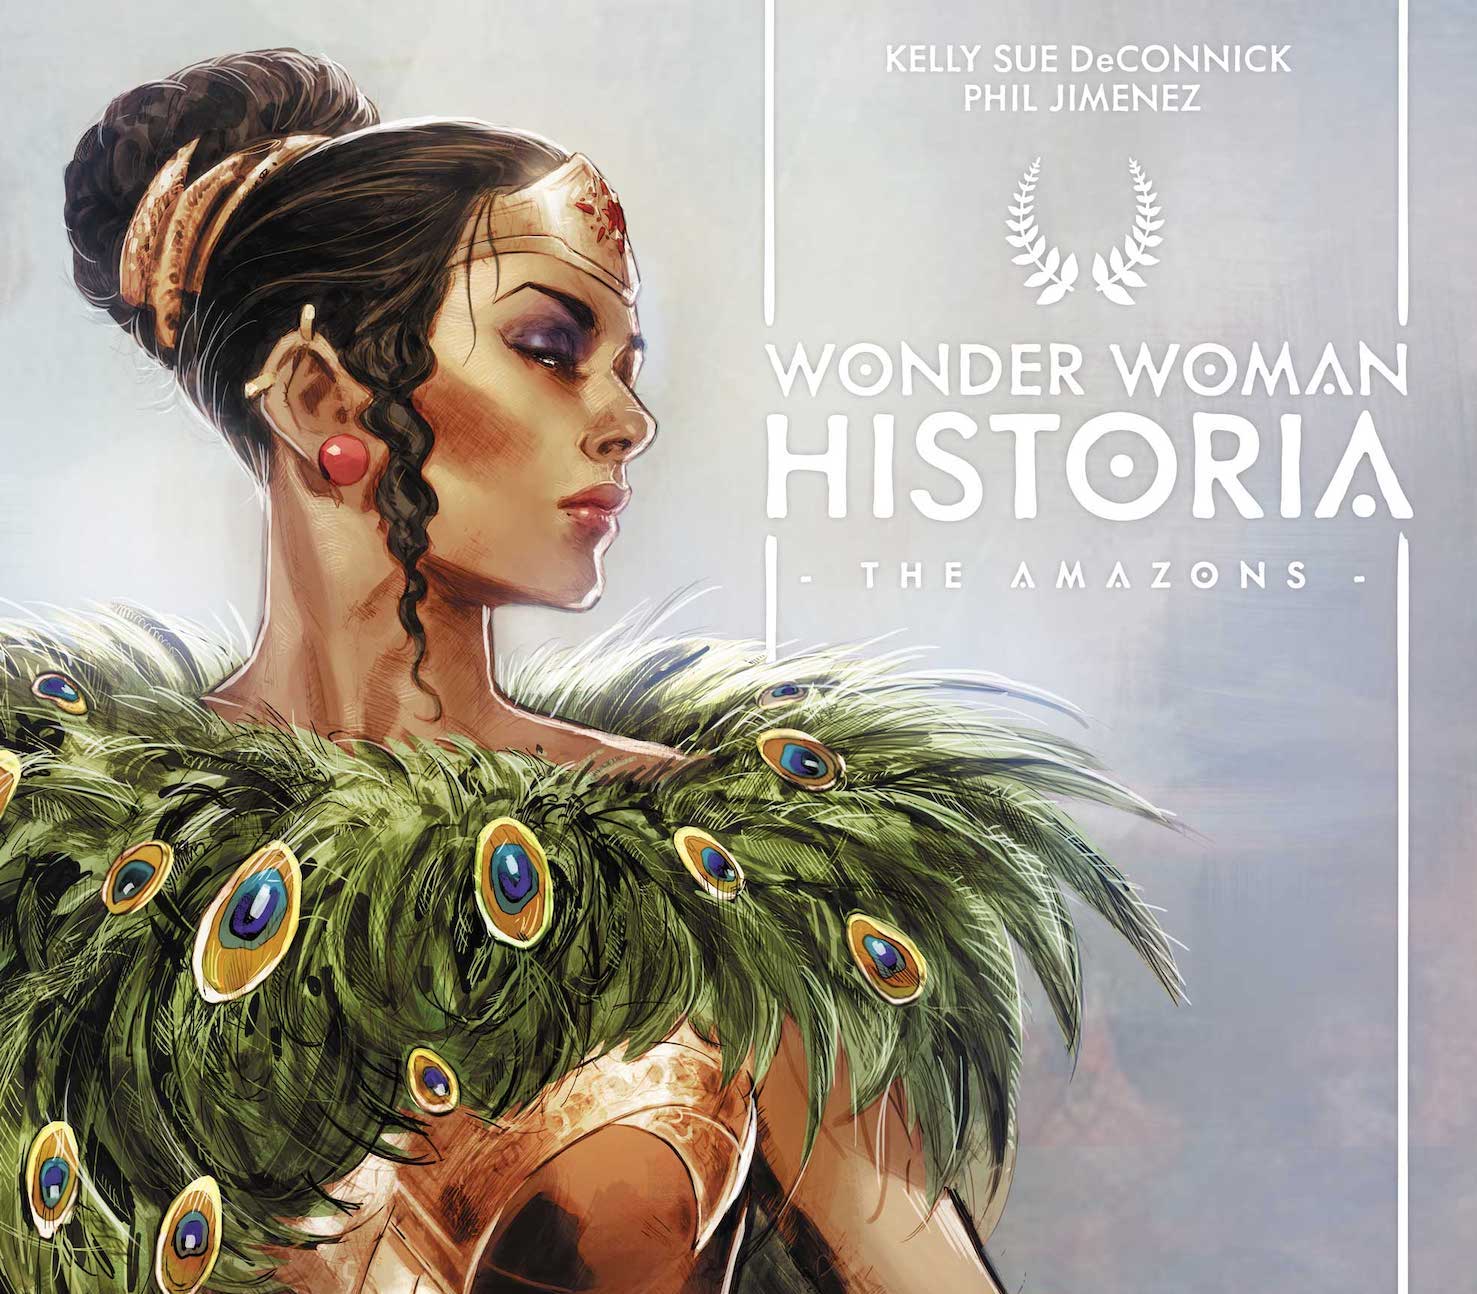 DC First Look: Wonder Woman Historia: The Amazons